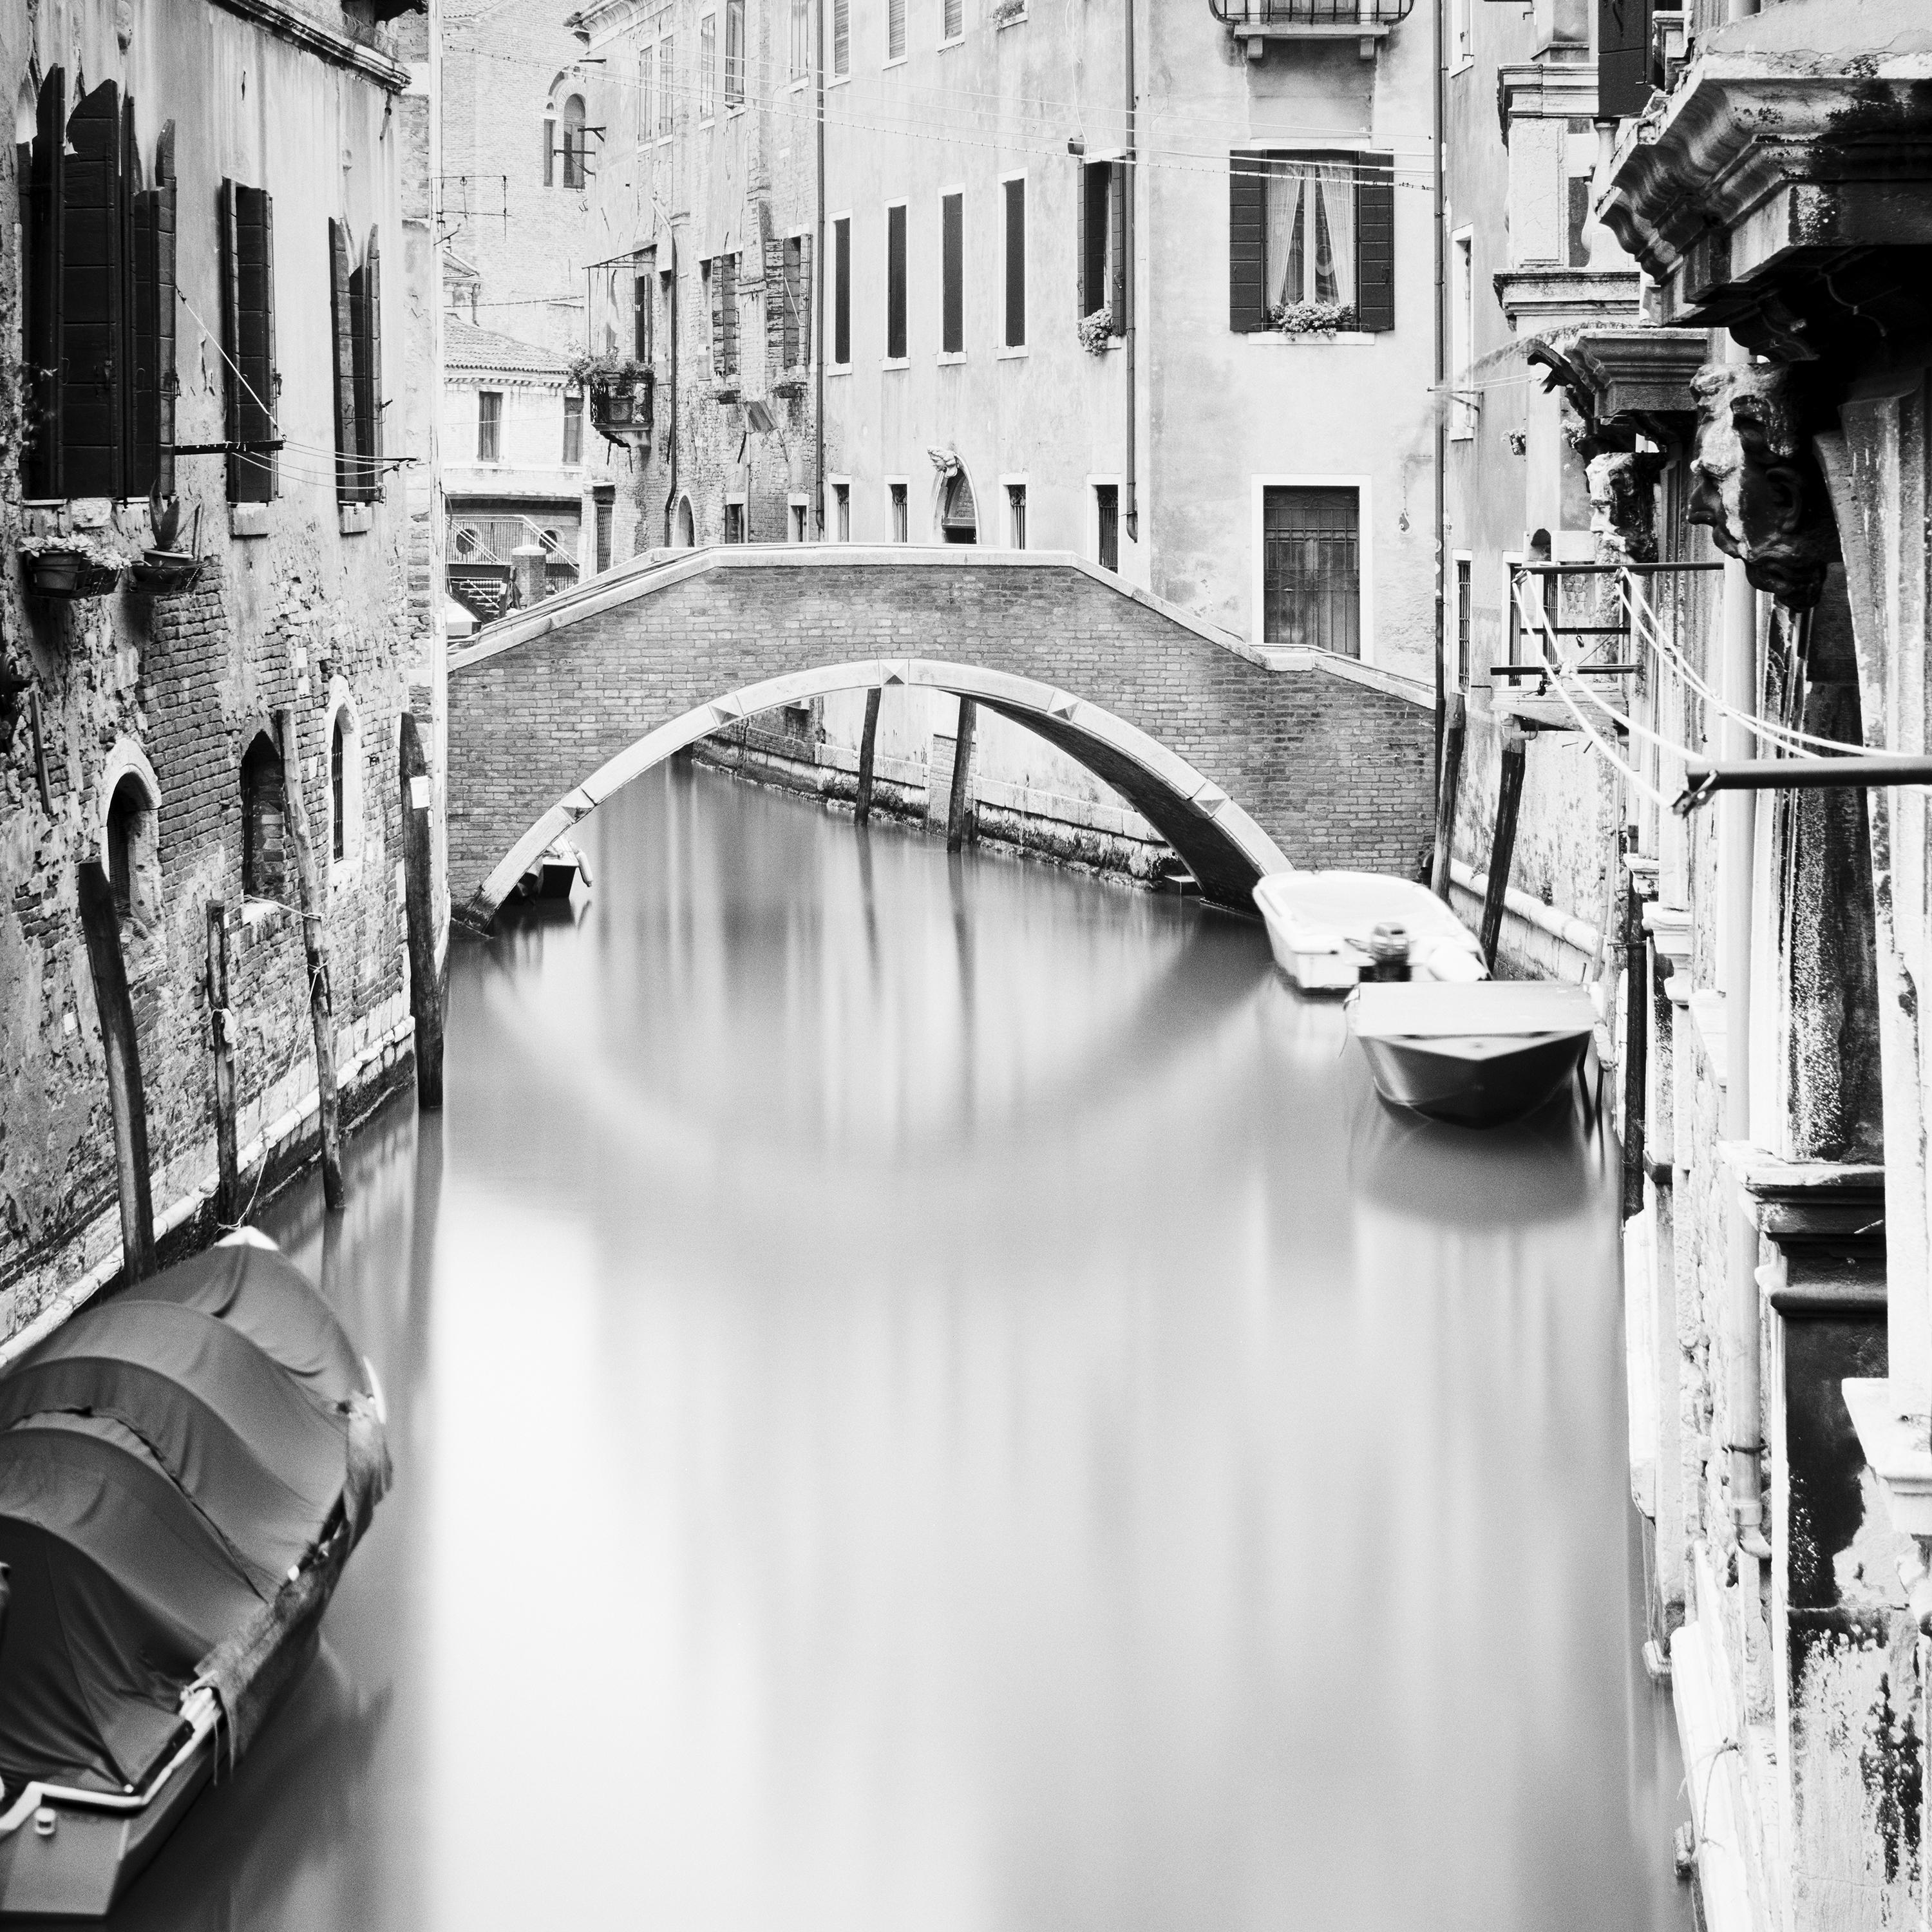 Black and White Fine Art Photography - Small stone bridge and a canal in Venice with boats. Archival pigment ink print, edition of 5. Signed, titled, dated and numbered by artist. Certificate of authenticity included. Printed with 4cm white